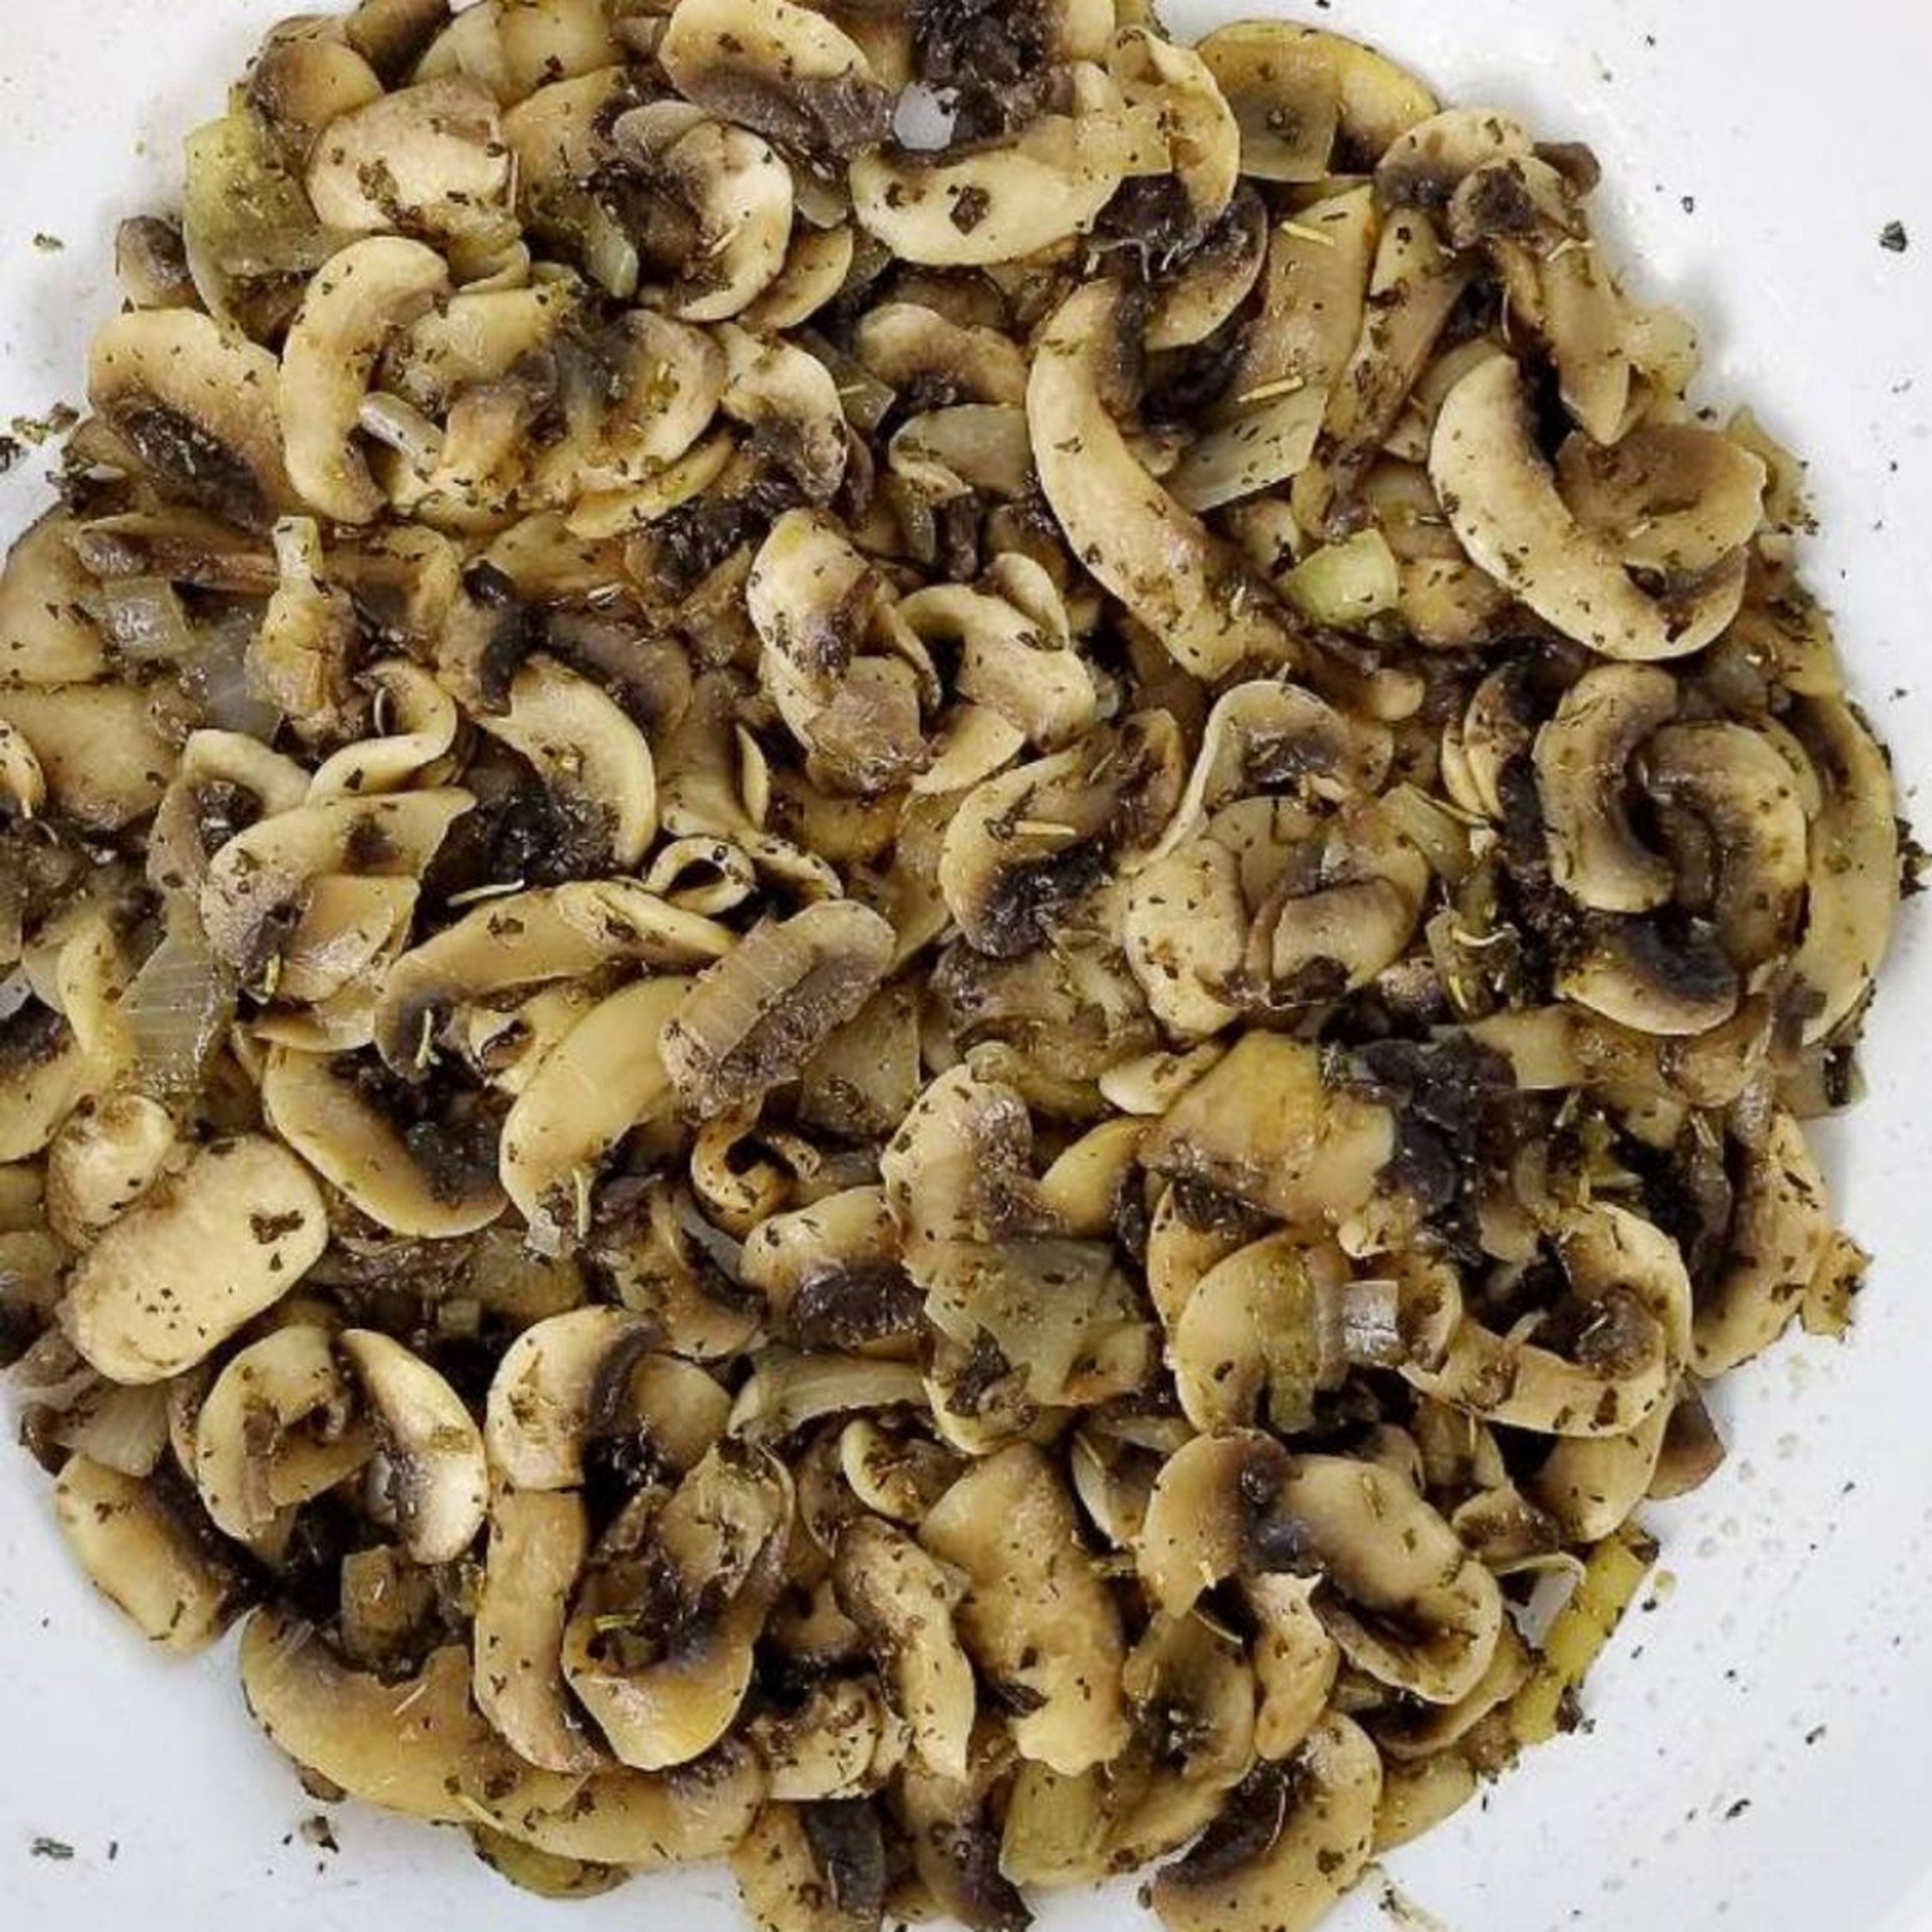 At the end of frying, add herbs de provanse salt abd pepper to the mushrooms. Take the pan fr the heat to cool down.